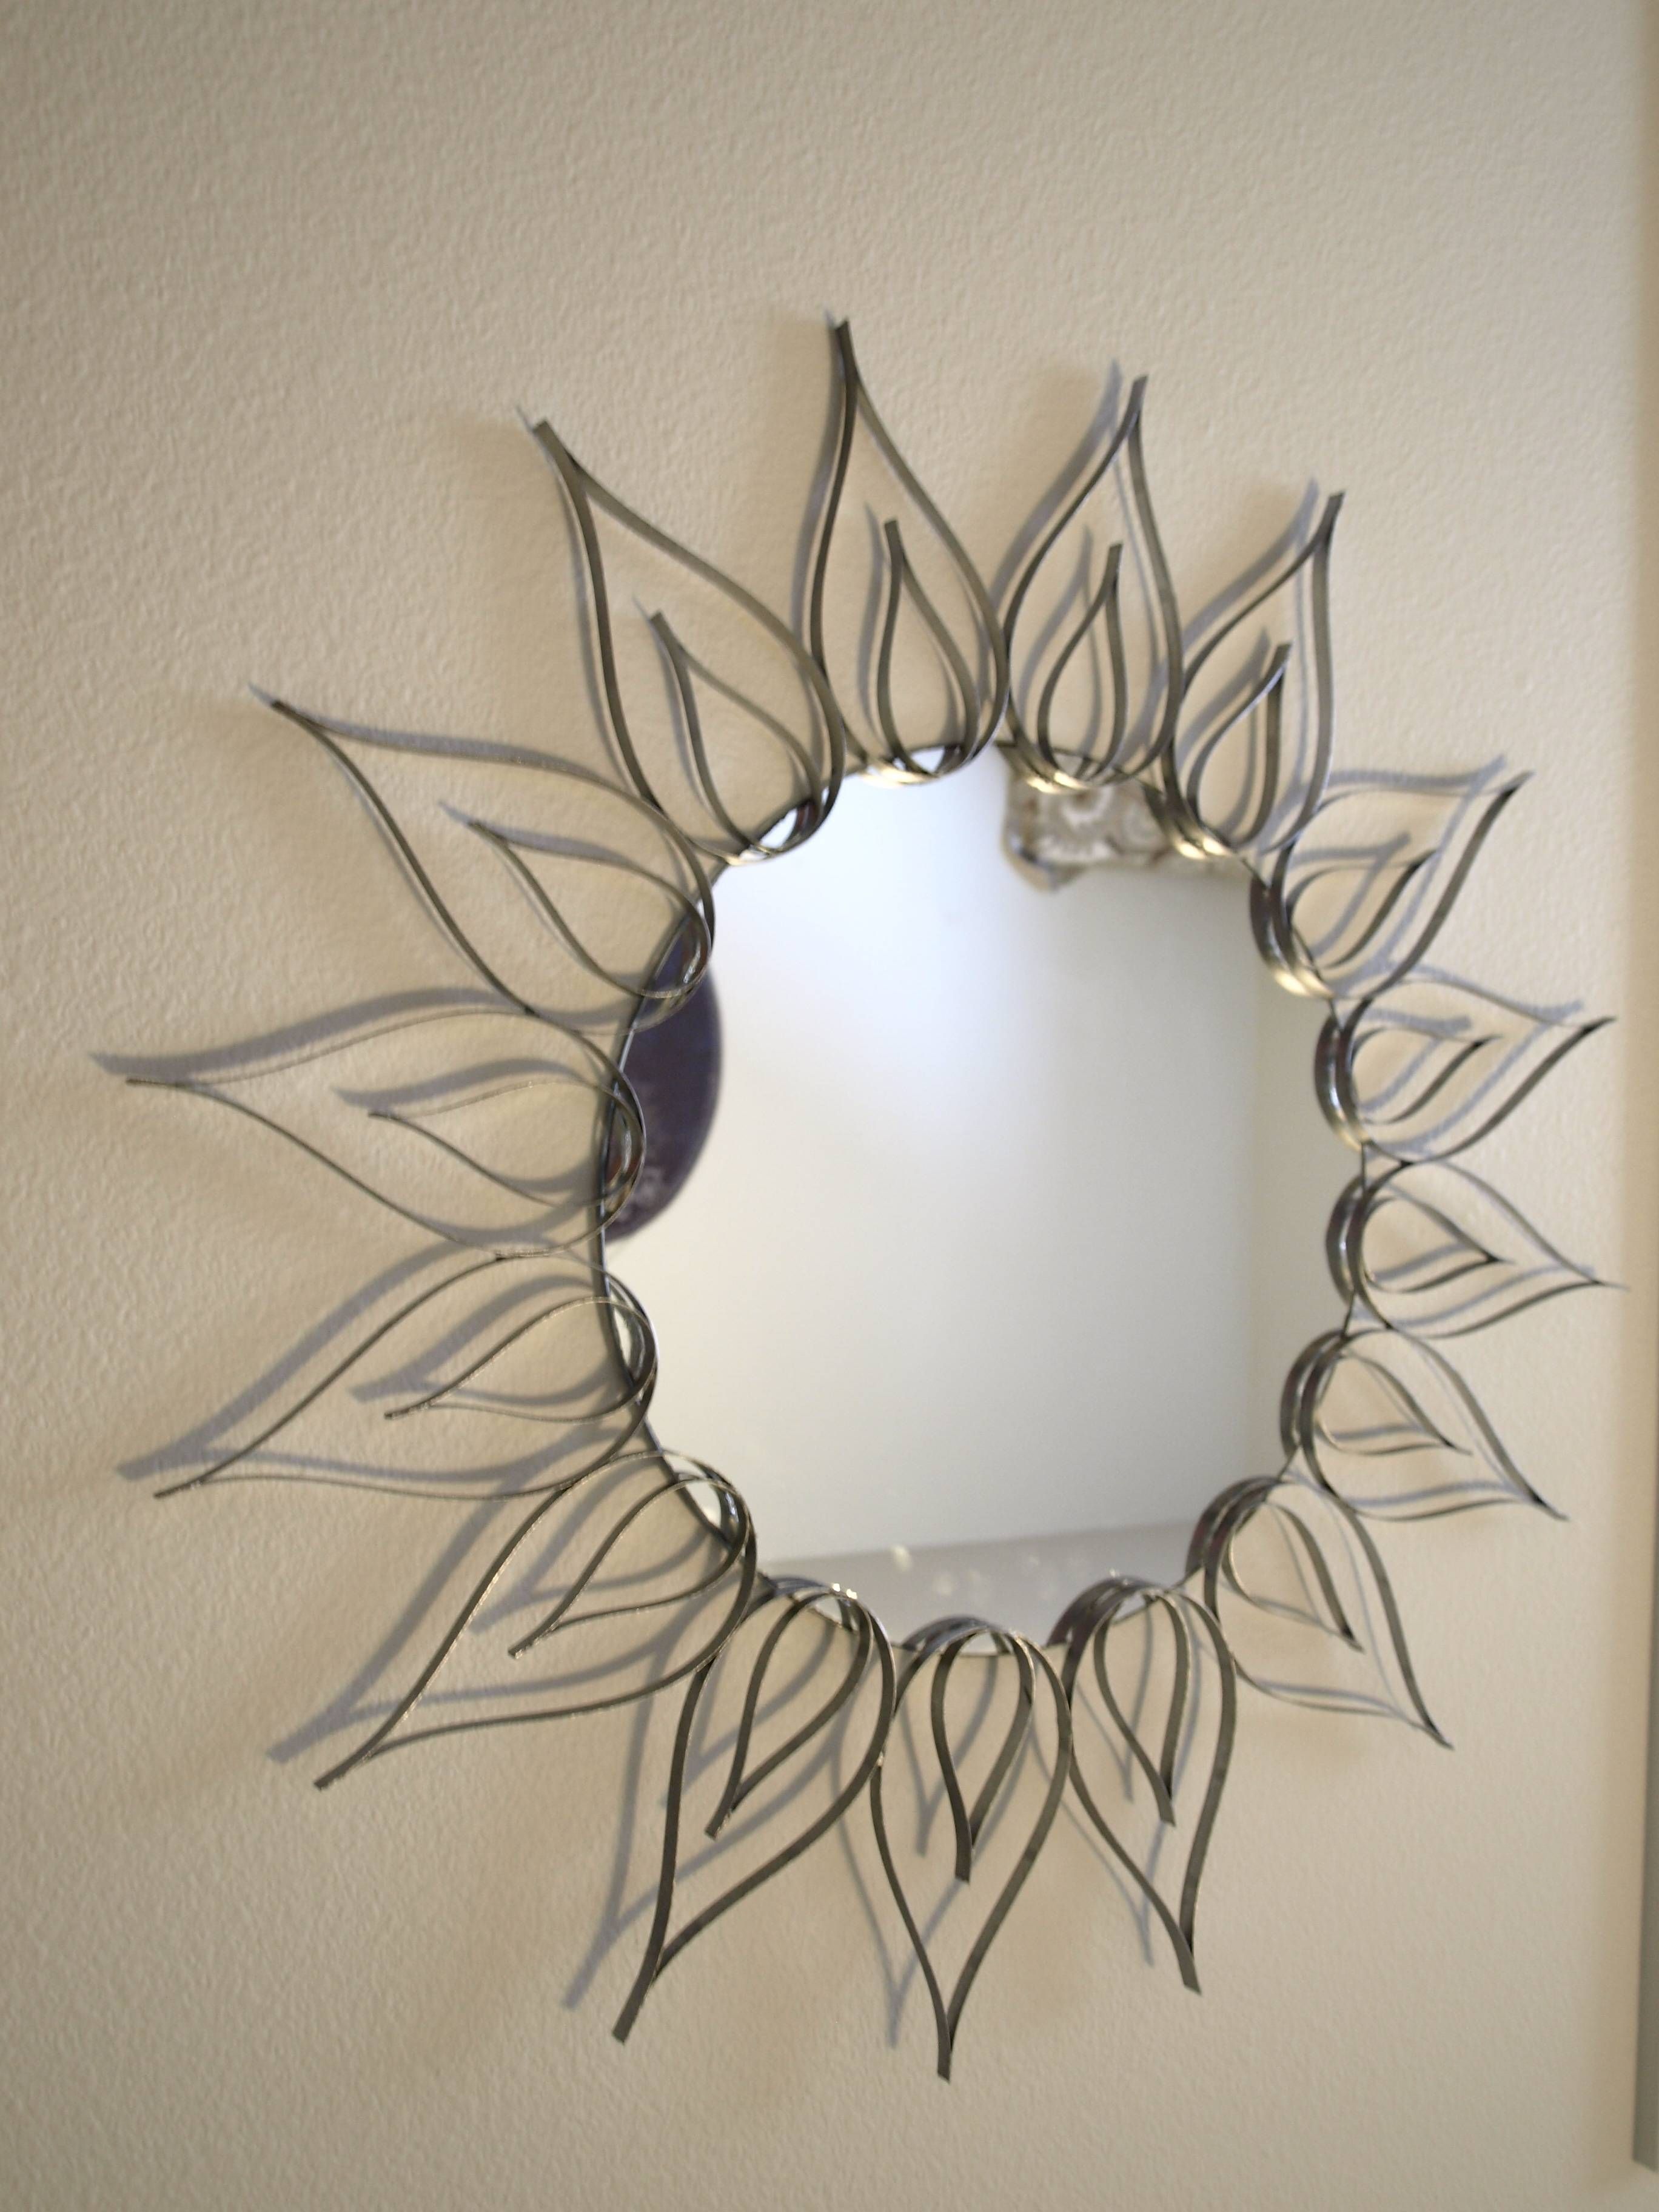 Small Decorative Wall Mirrors : Designs Of Wall Mirror Decor – The Intended For Decorative Small Mirrors (View 18 of 25)